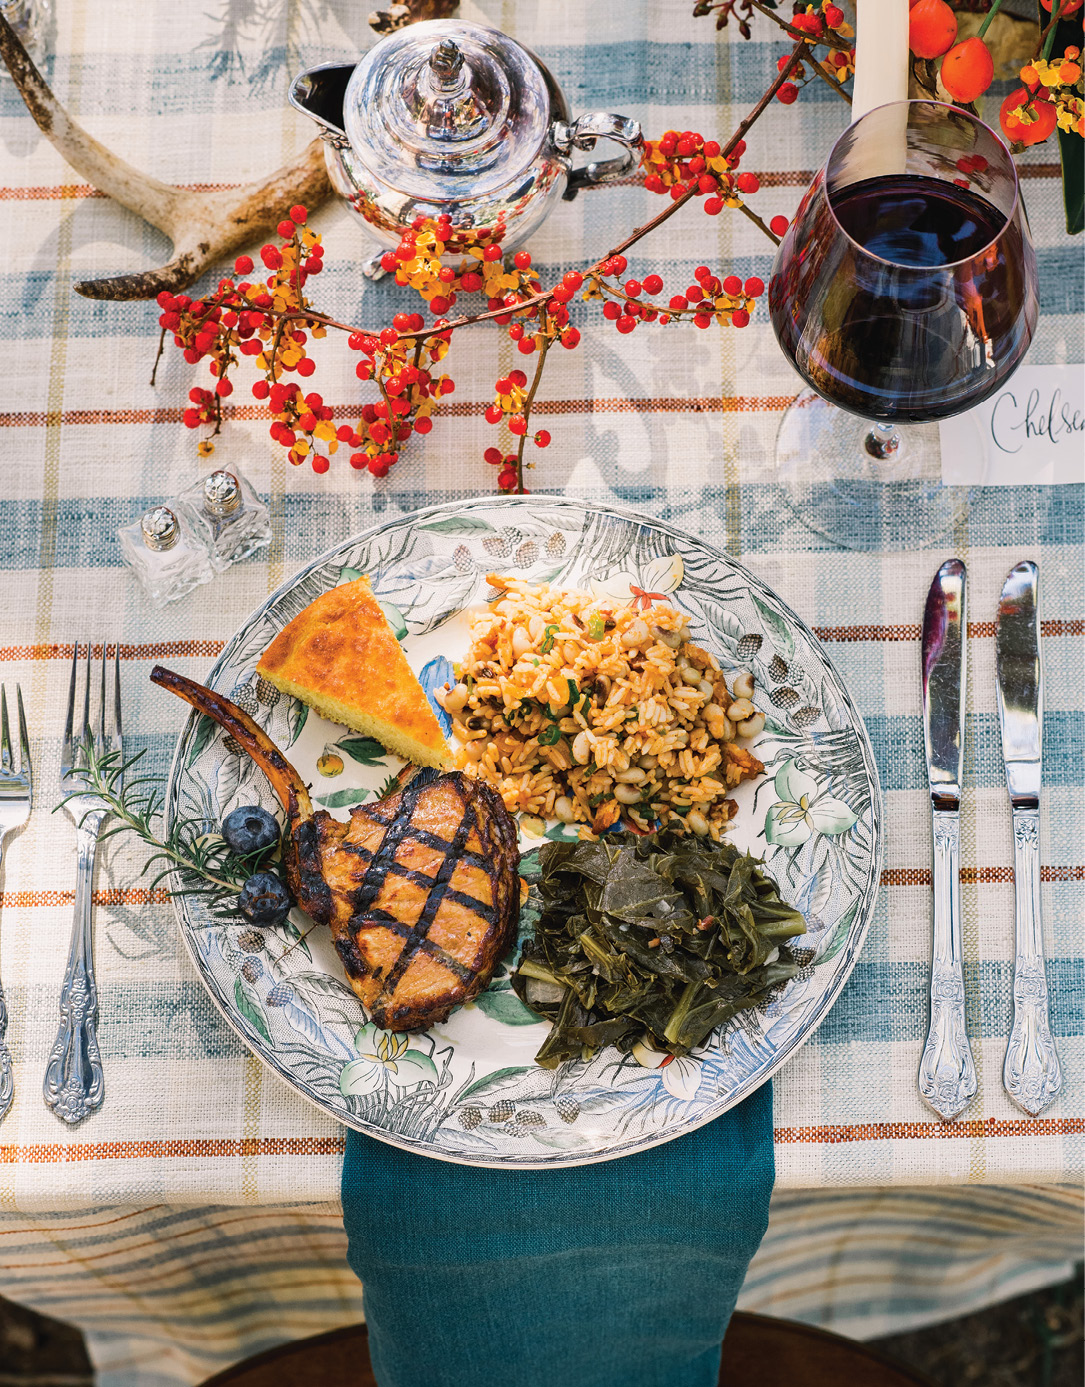 Each household sits at their own table with the sides they made served family-style. The host wore a mask and gloves to grill pork chops for all.